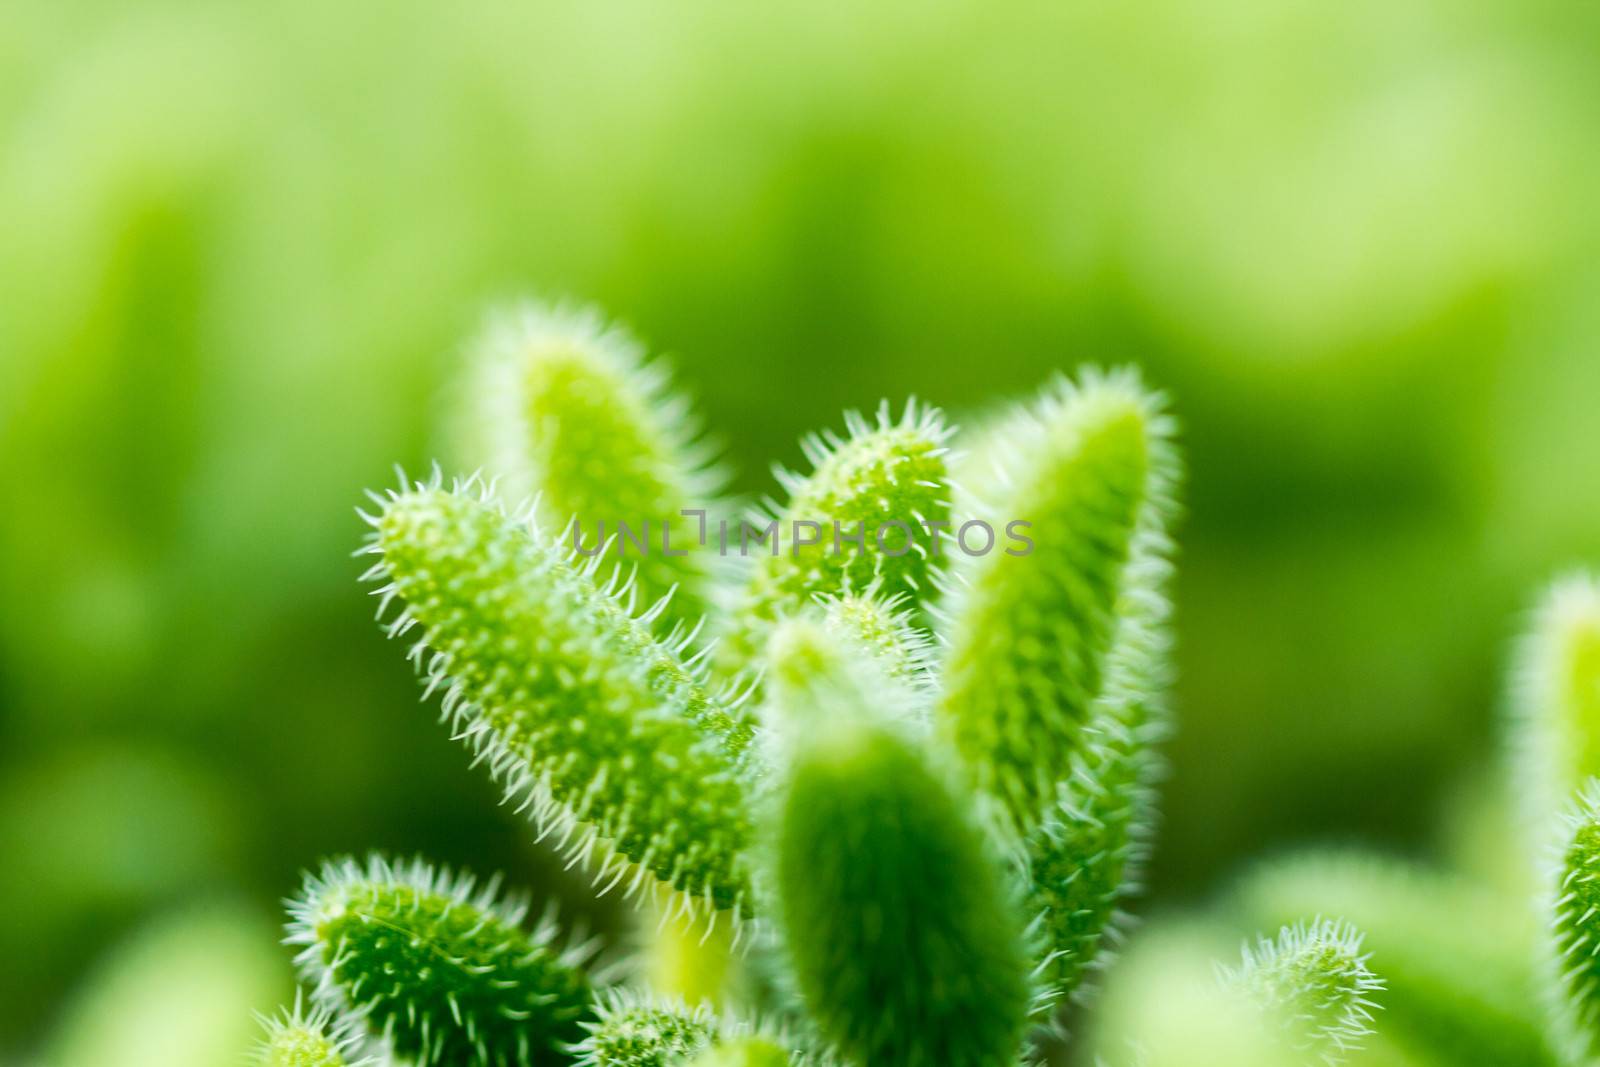 close up view of cactus with blurry background